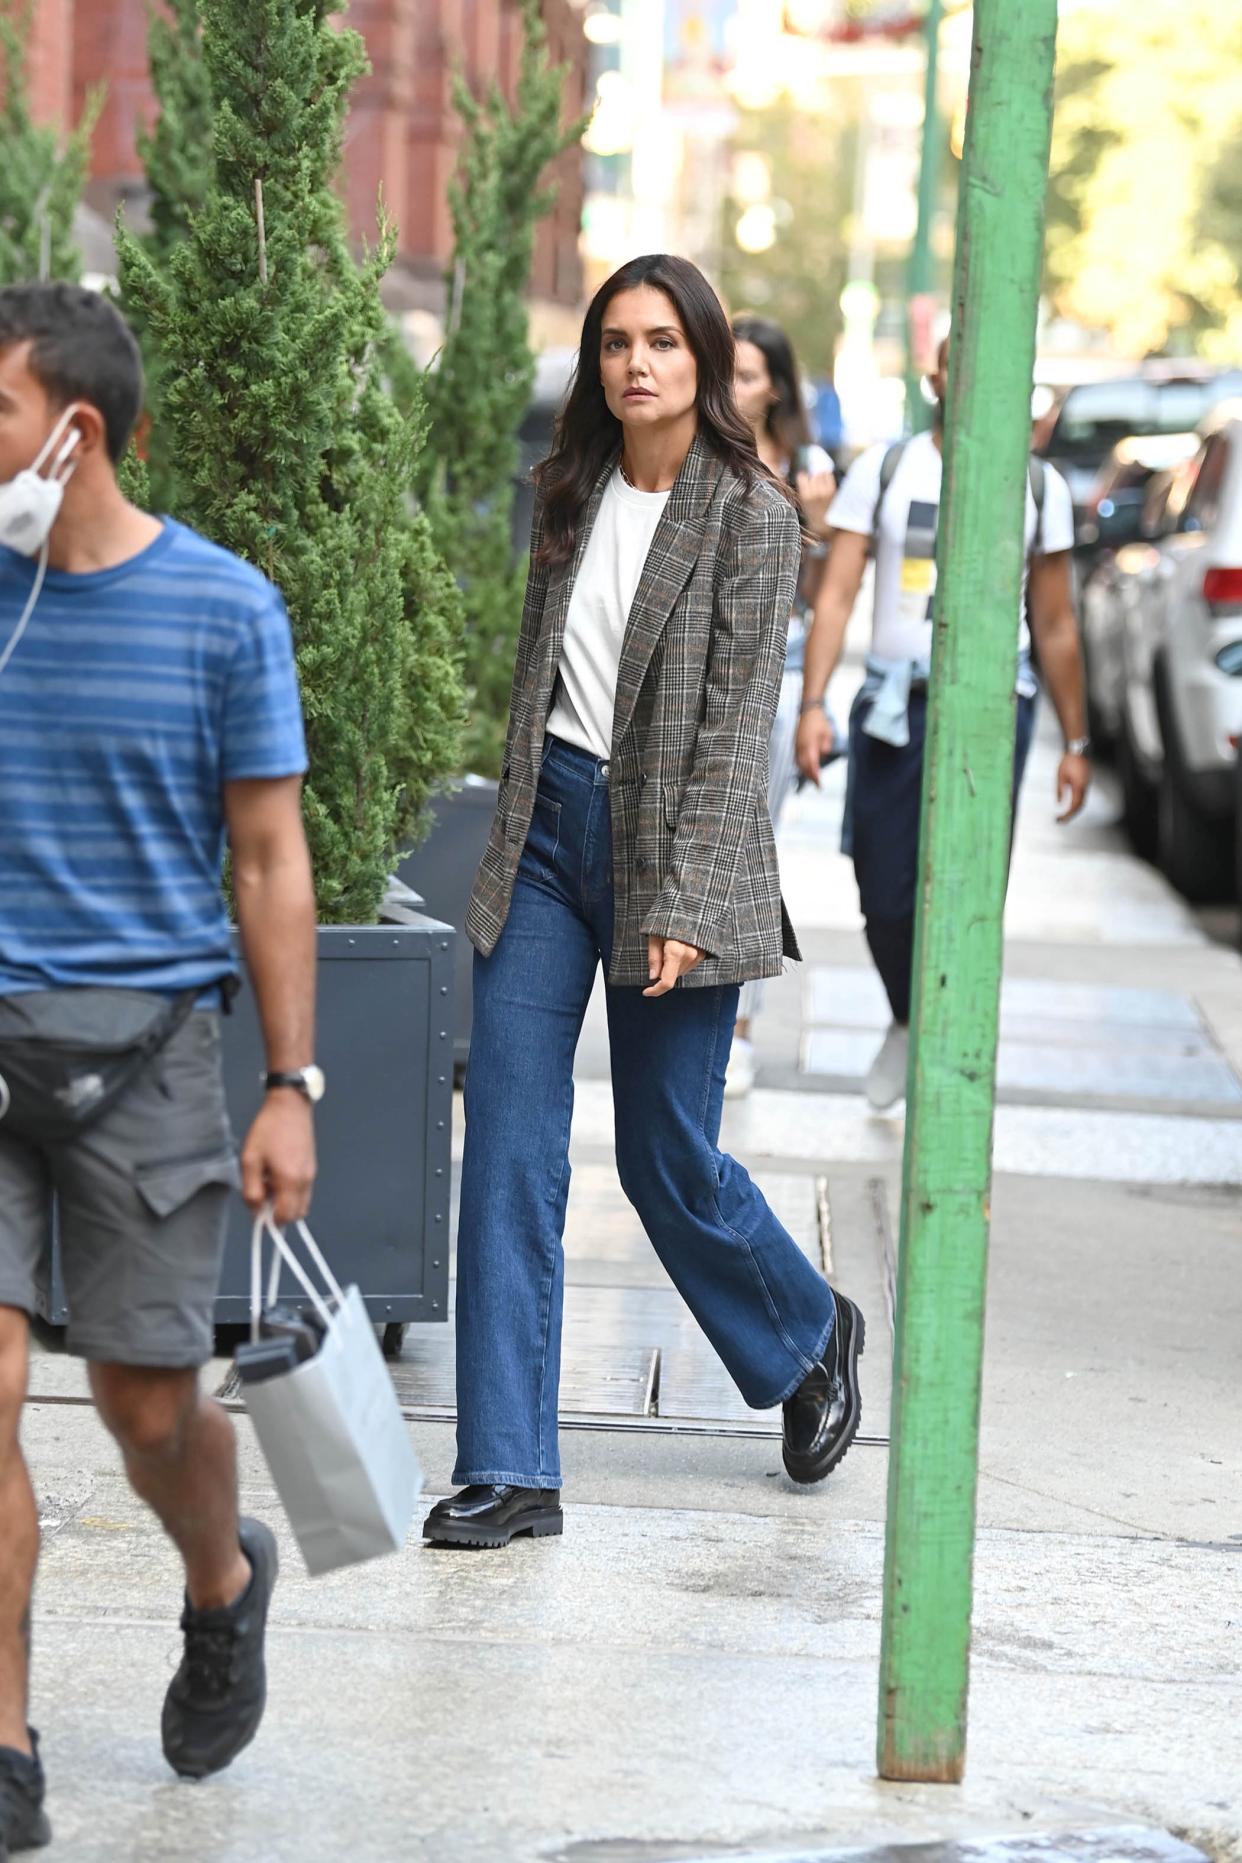 Katie Holmes looked chic and polished in her Reformation loafers. (Photo: Michael Simon)